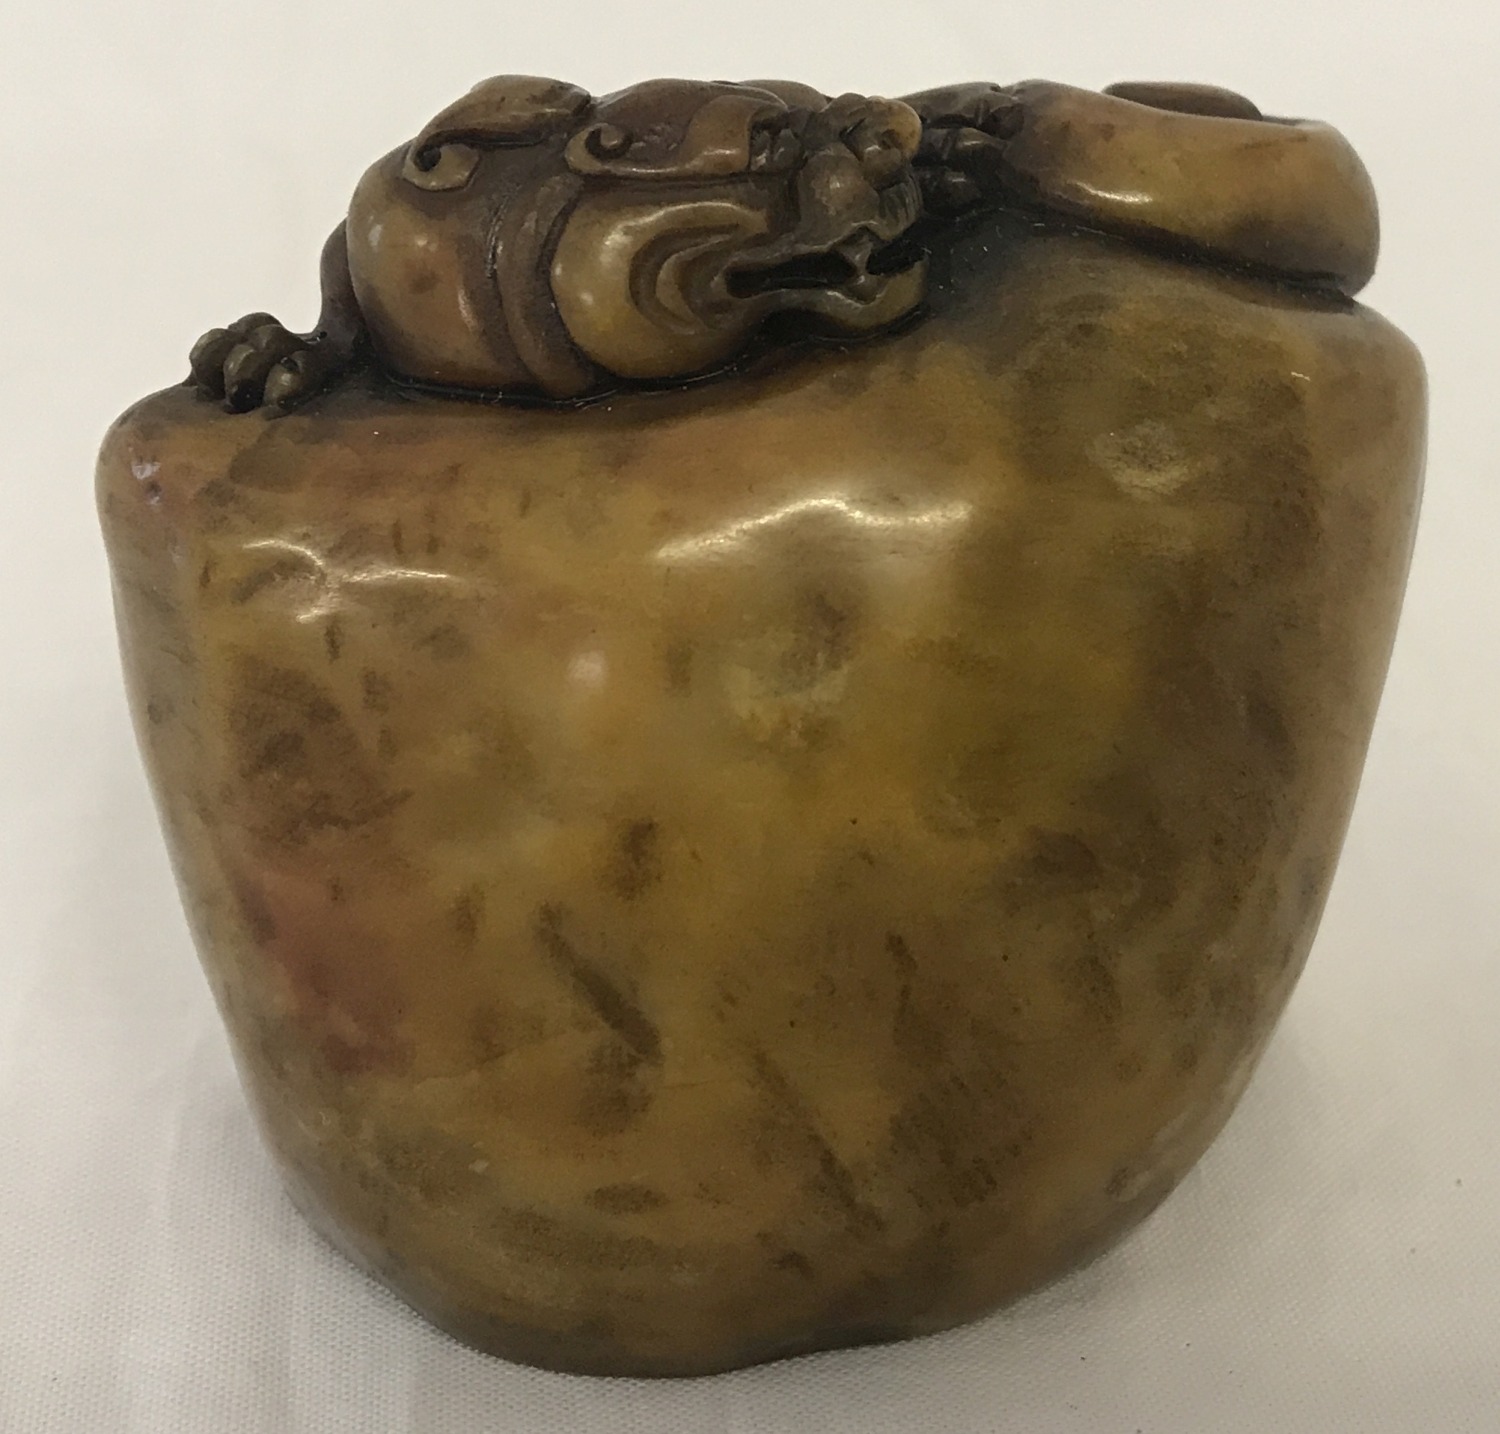 A decorative Oriental soapstone seal with carved dragon detail.